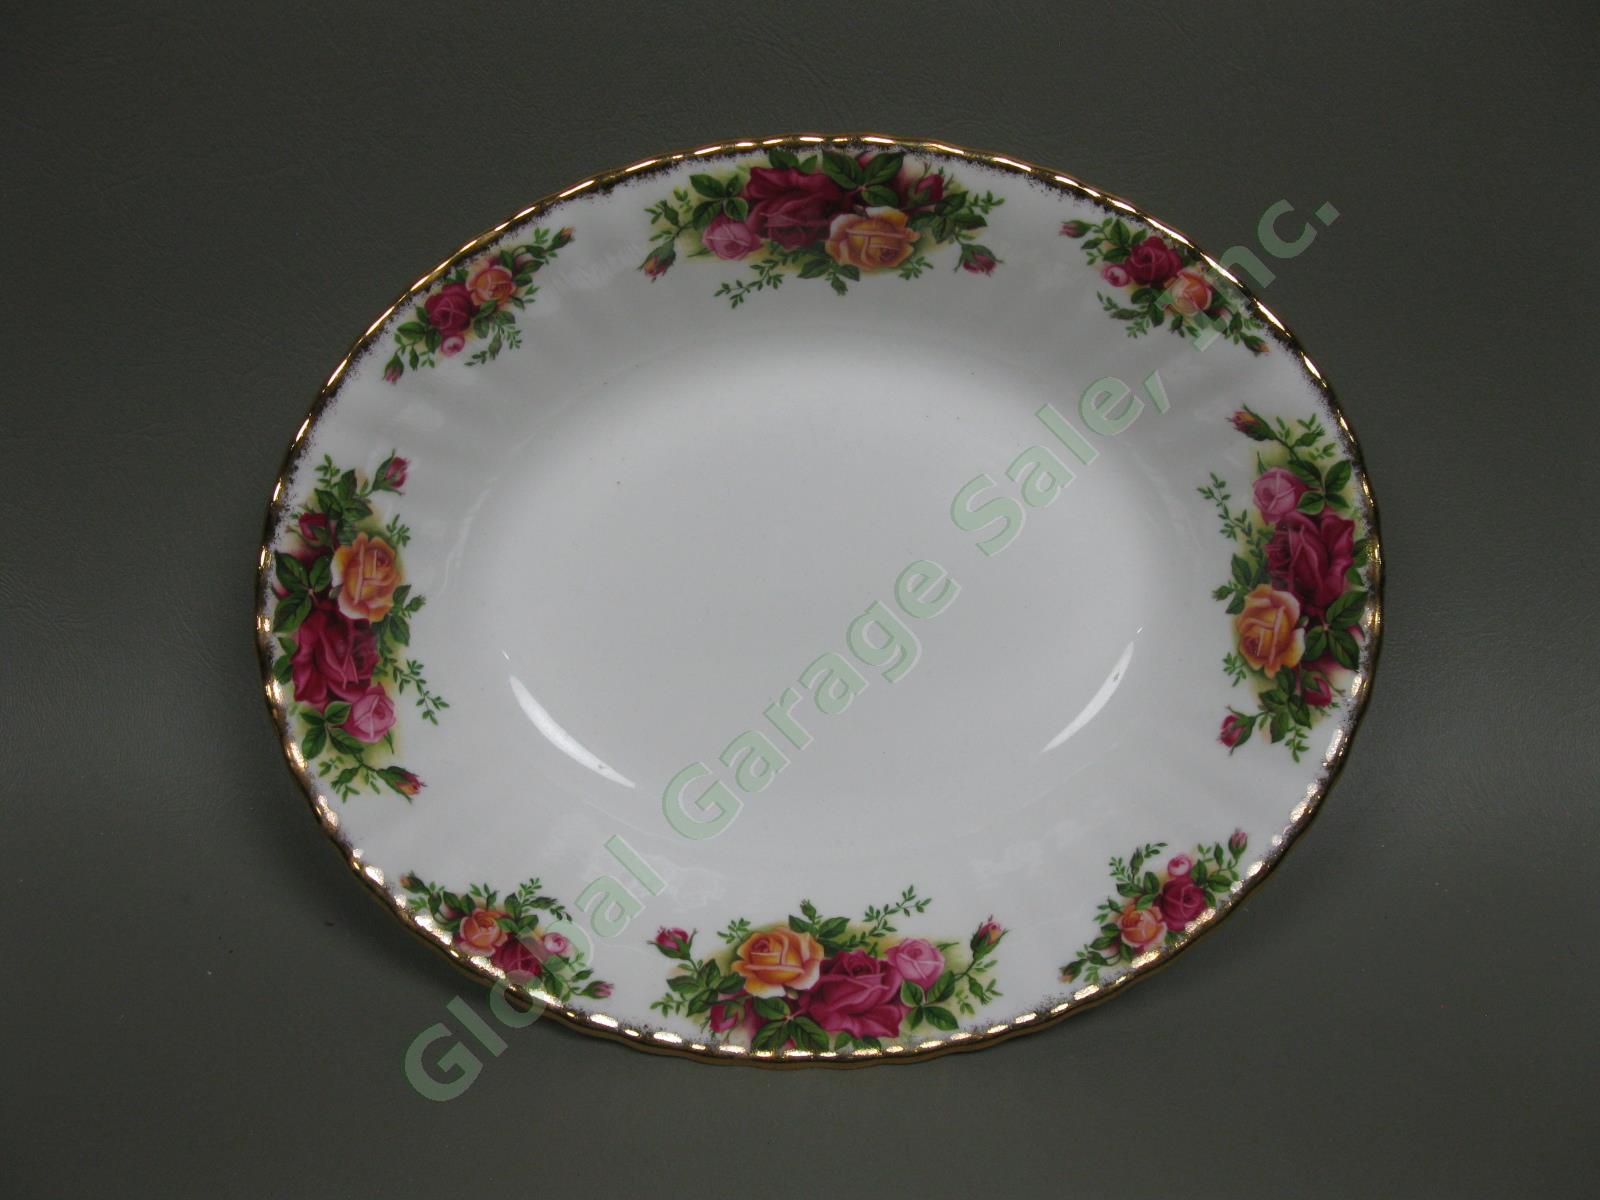 4 Royal Albert Old Country Roses Place Settings Serving Bowl Platter Plate Set 22